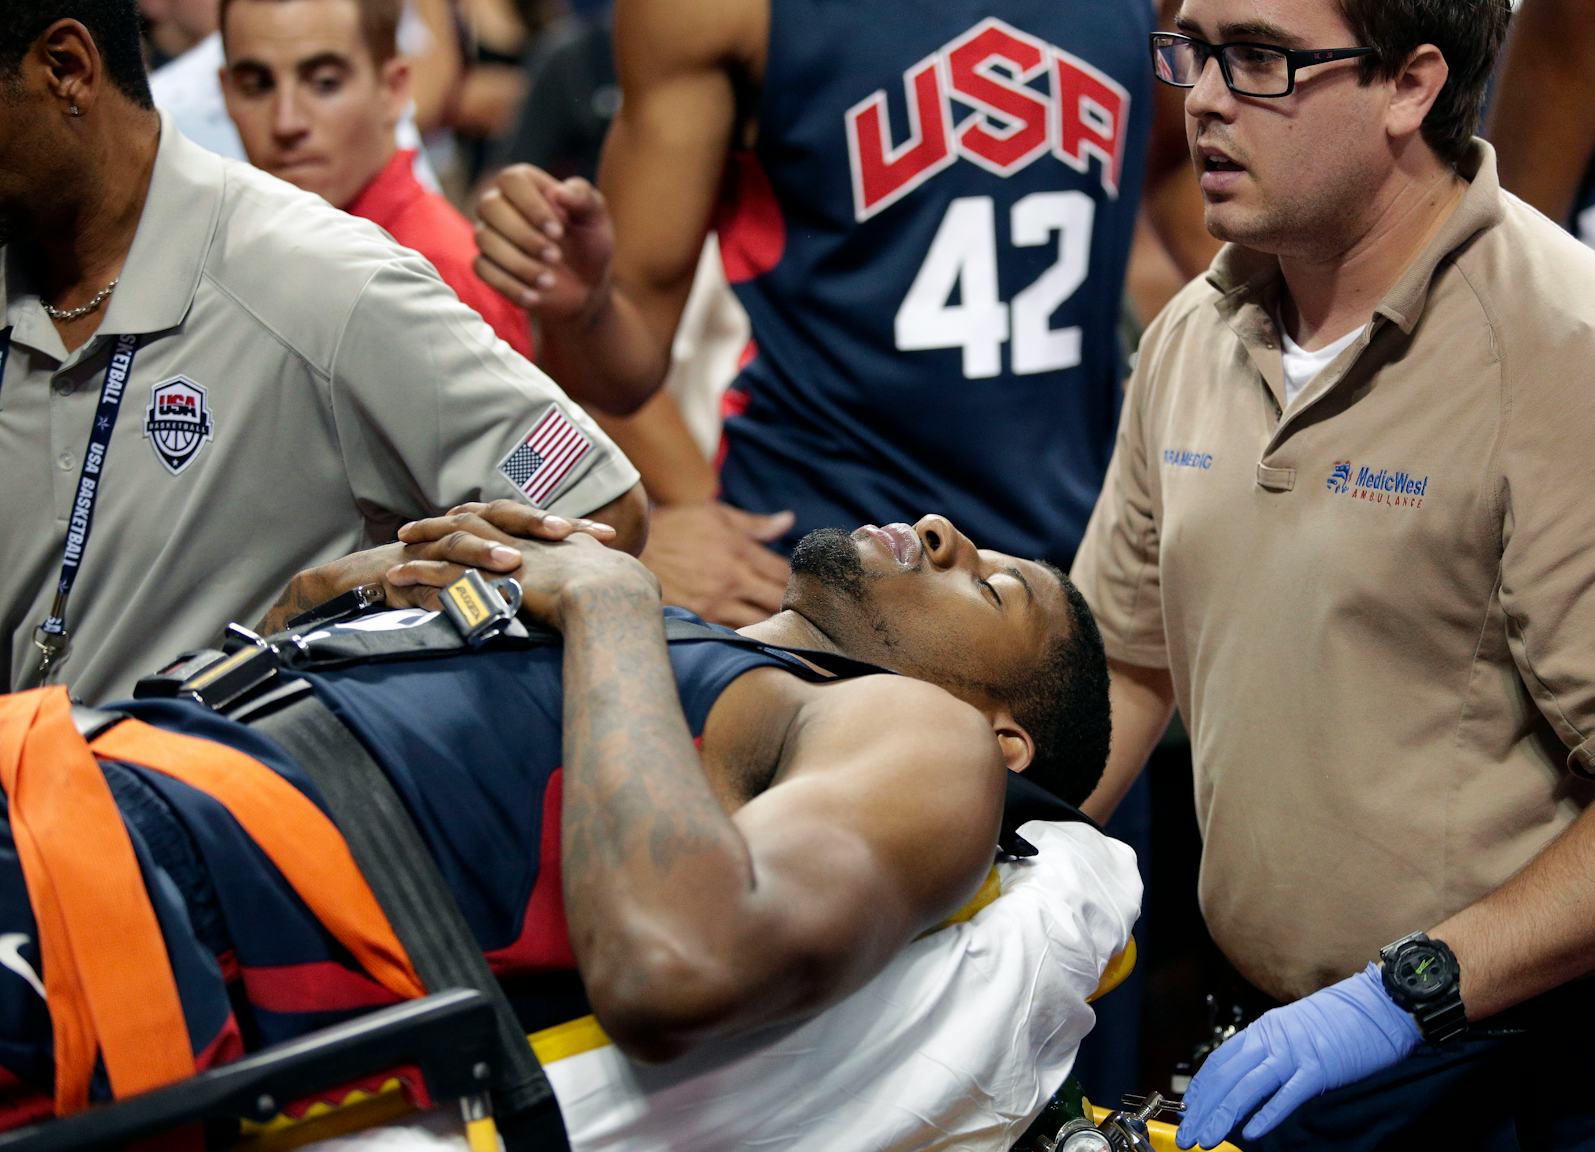 The Basketball World Shares an Uplifting Moment of Support After a